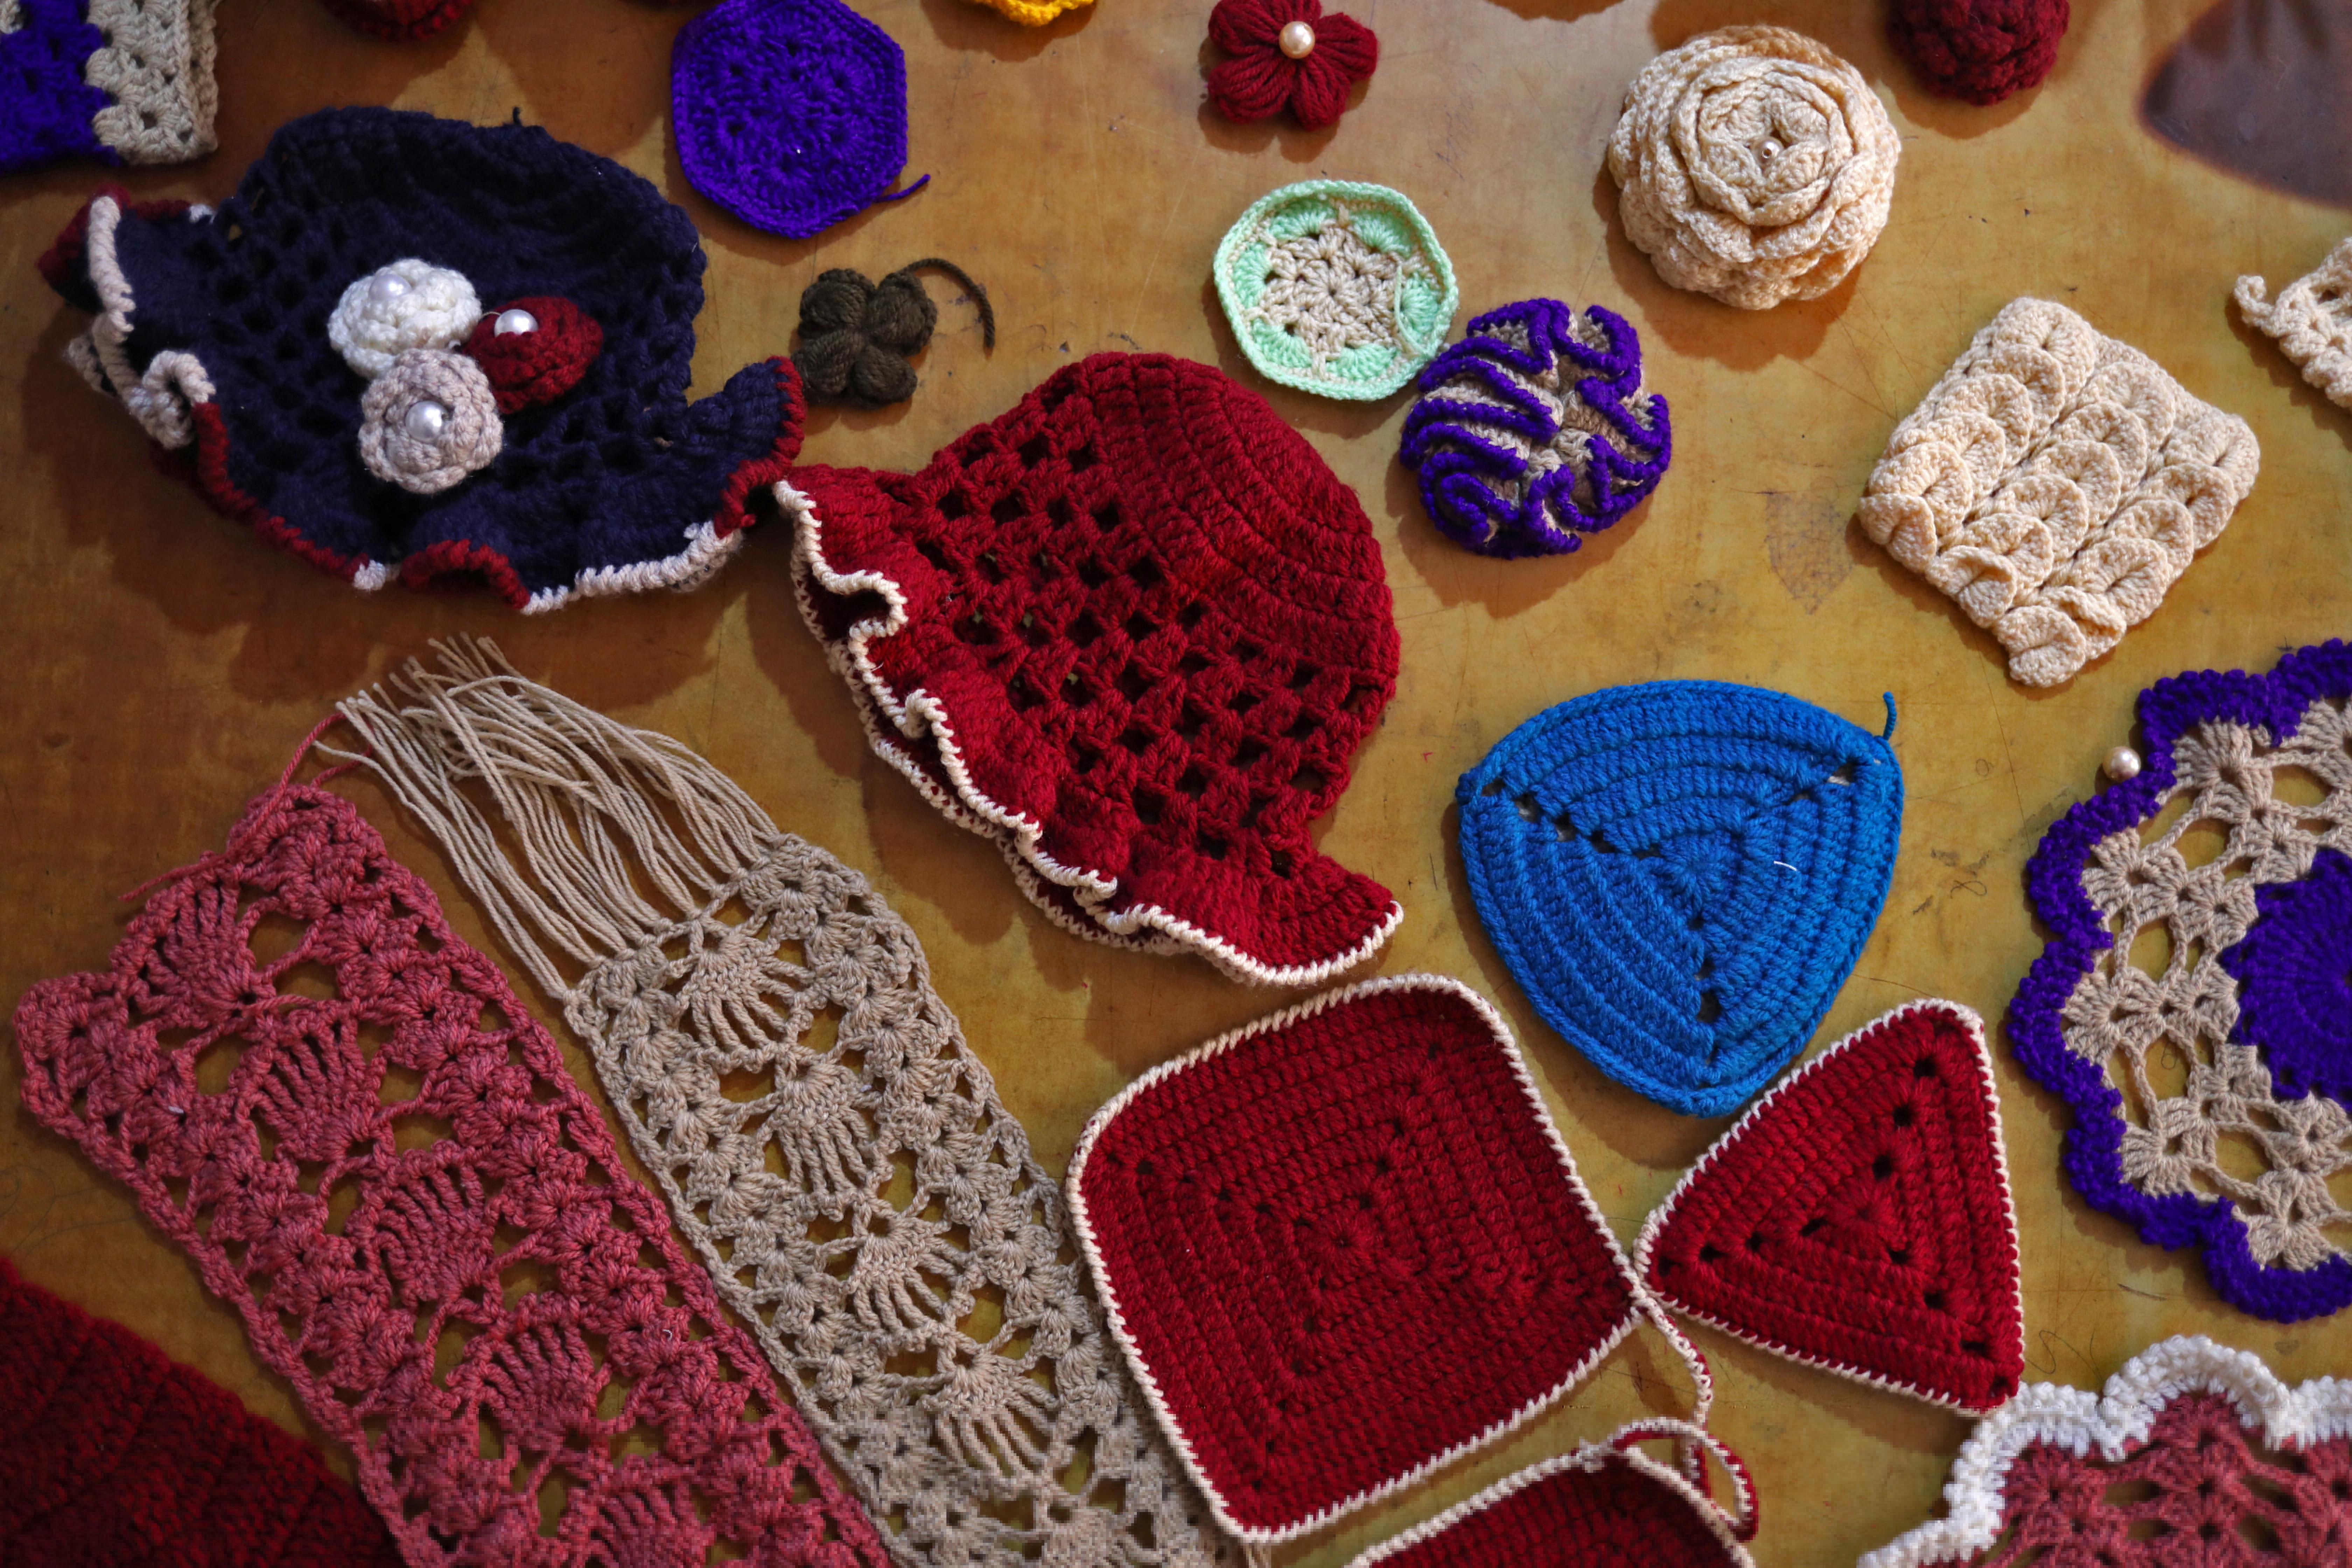 Knitted products are pictured at a sewing workshop in Kabul